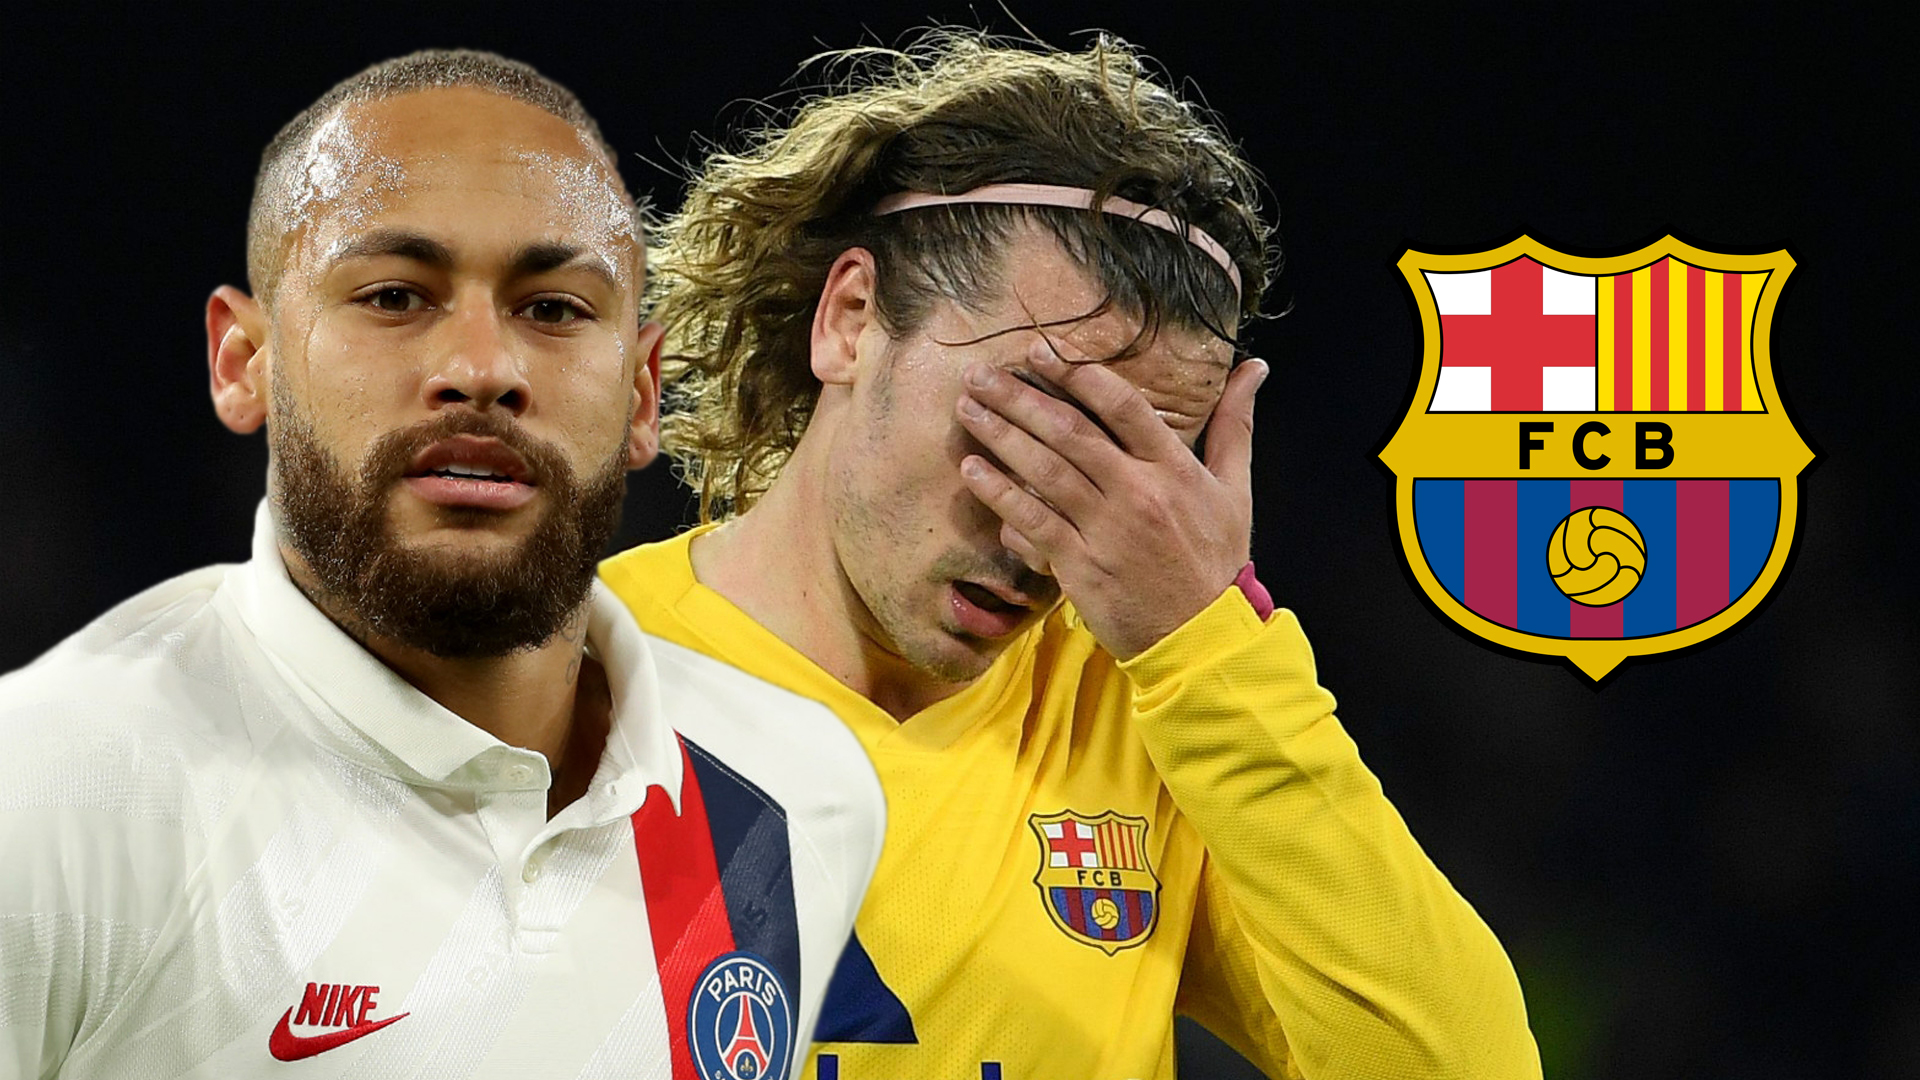 Transfer news and rumours LIVE: Barca hoping to swap Griezmann for Neymar